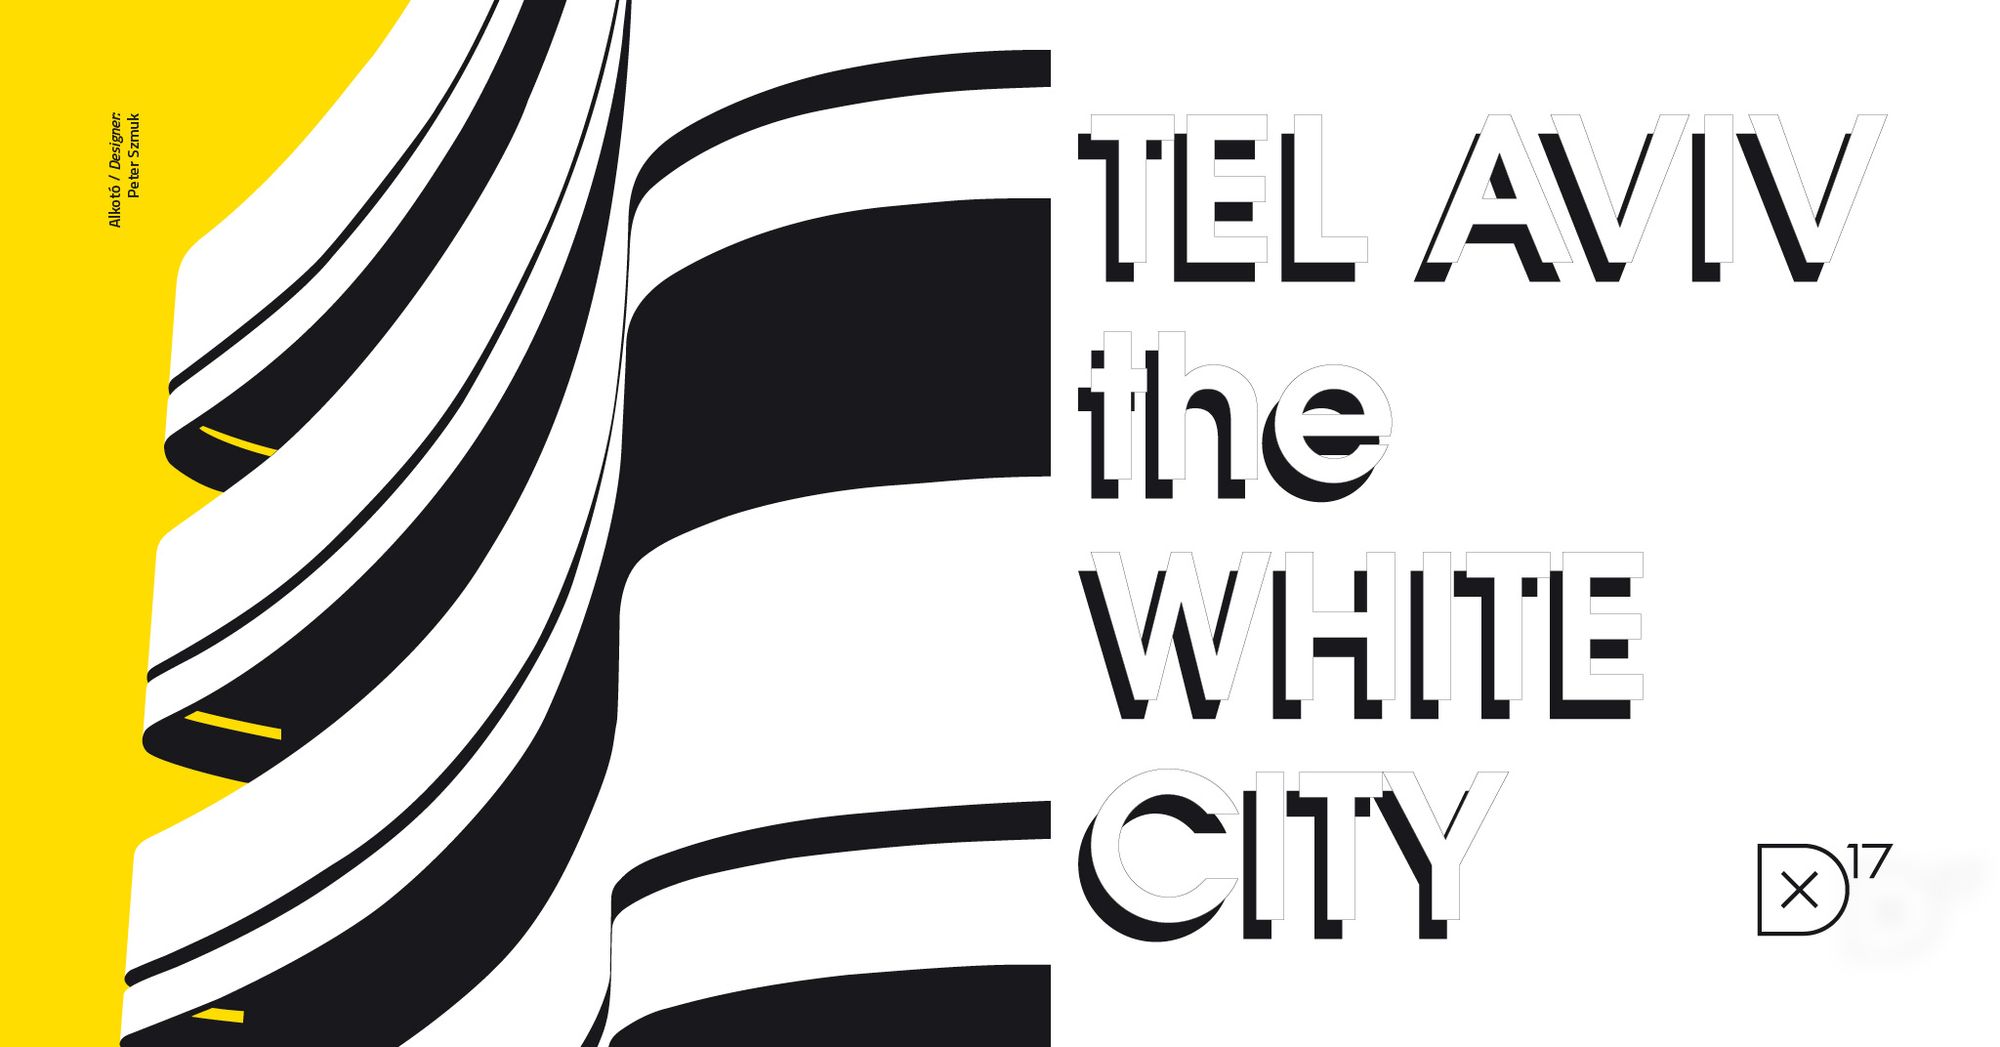 The white city of Tel Aviv—Deák17 Gallery hosts an international traveling exhibition